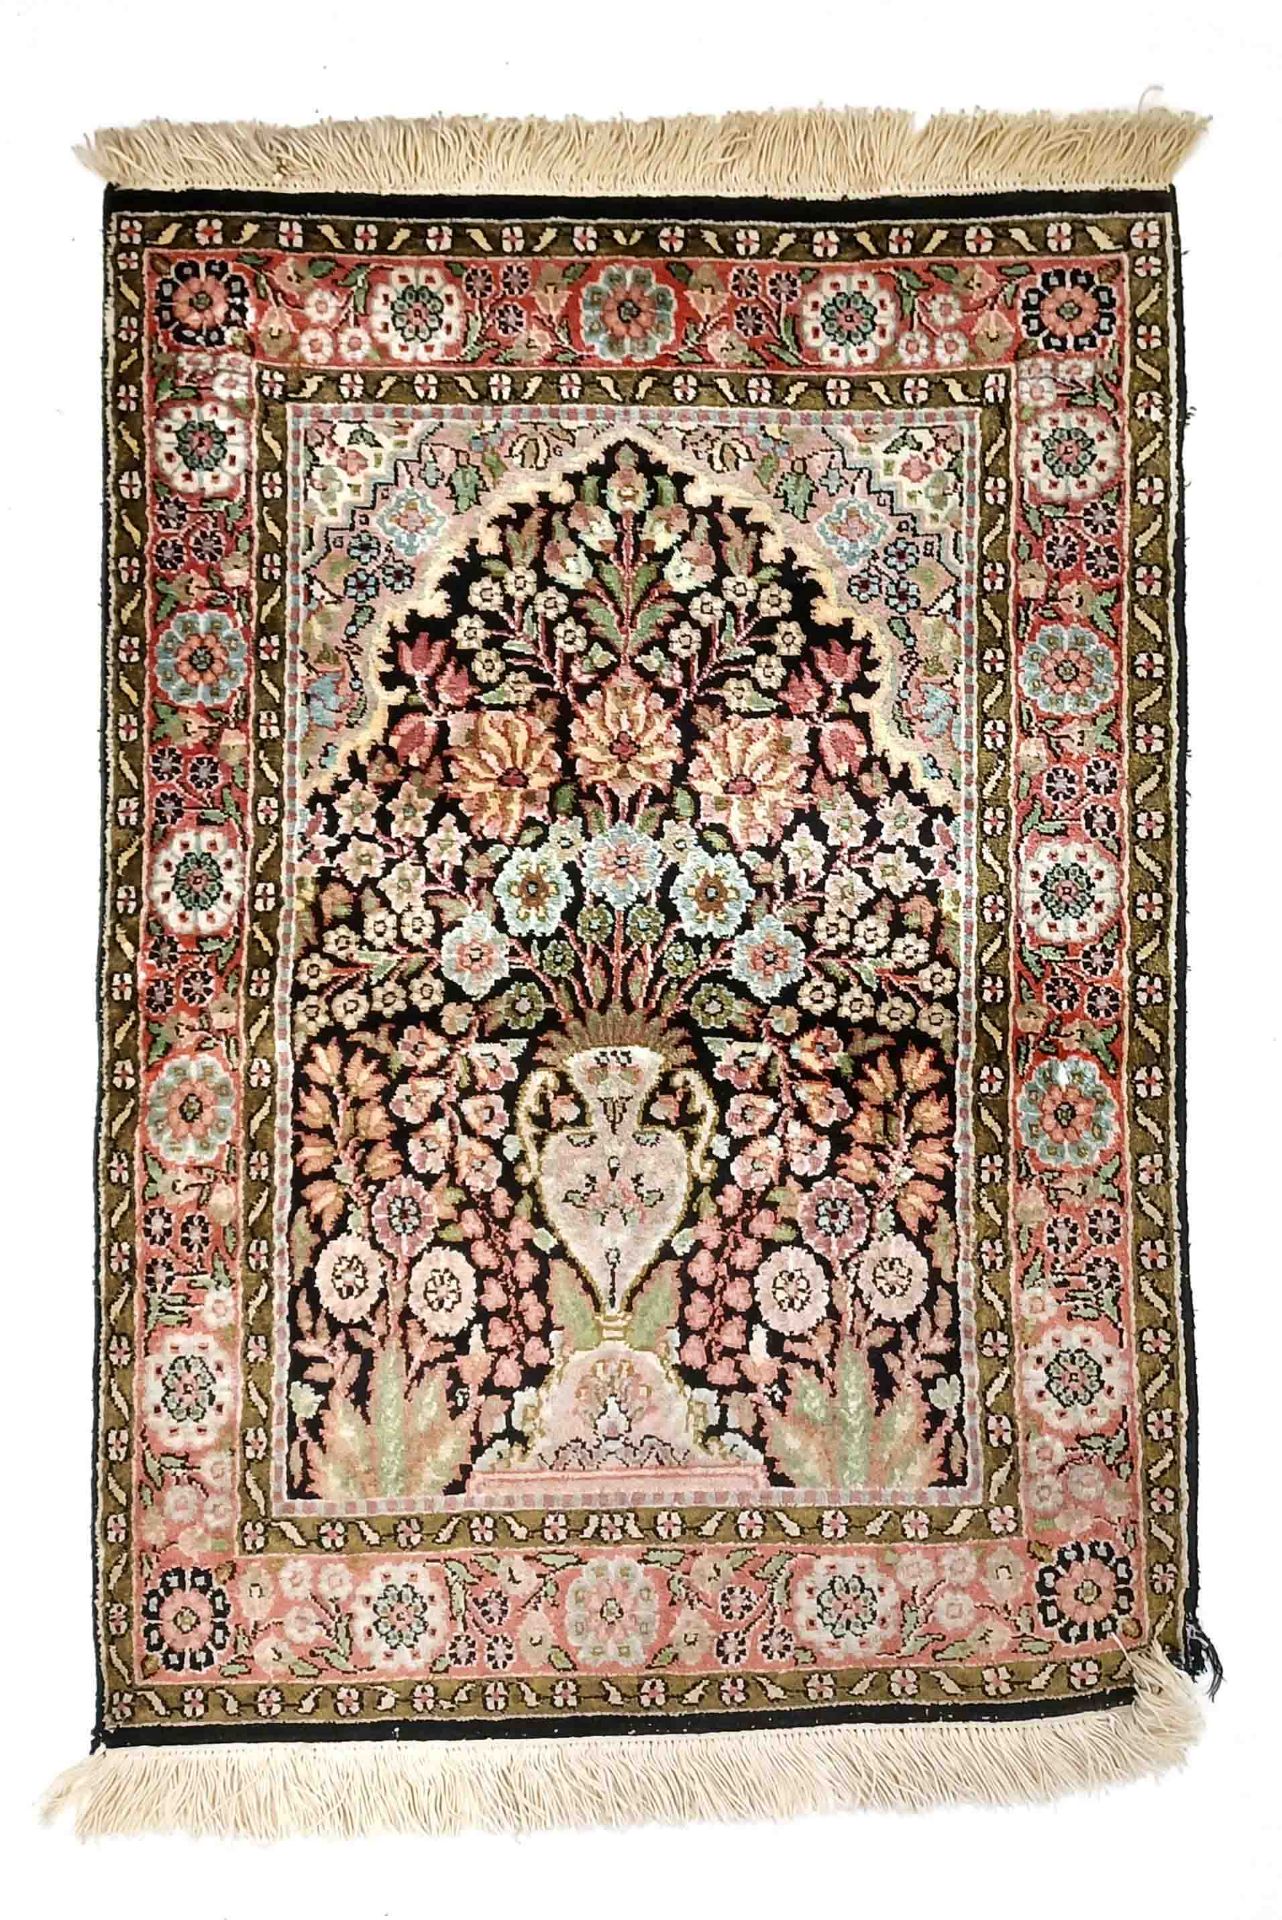 Carpet, Rug, Rug, silk, even pile, one edge with small damage, 96 x 66 cm